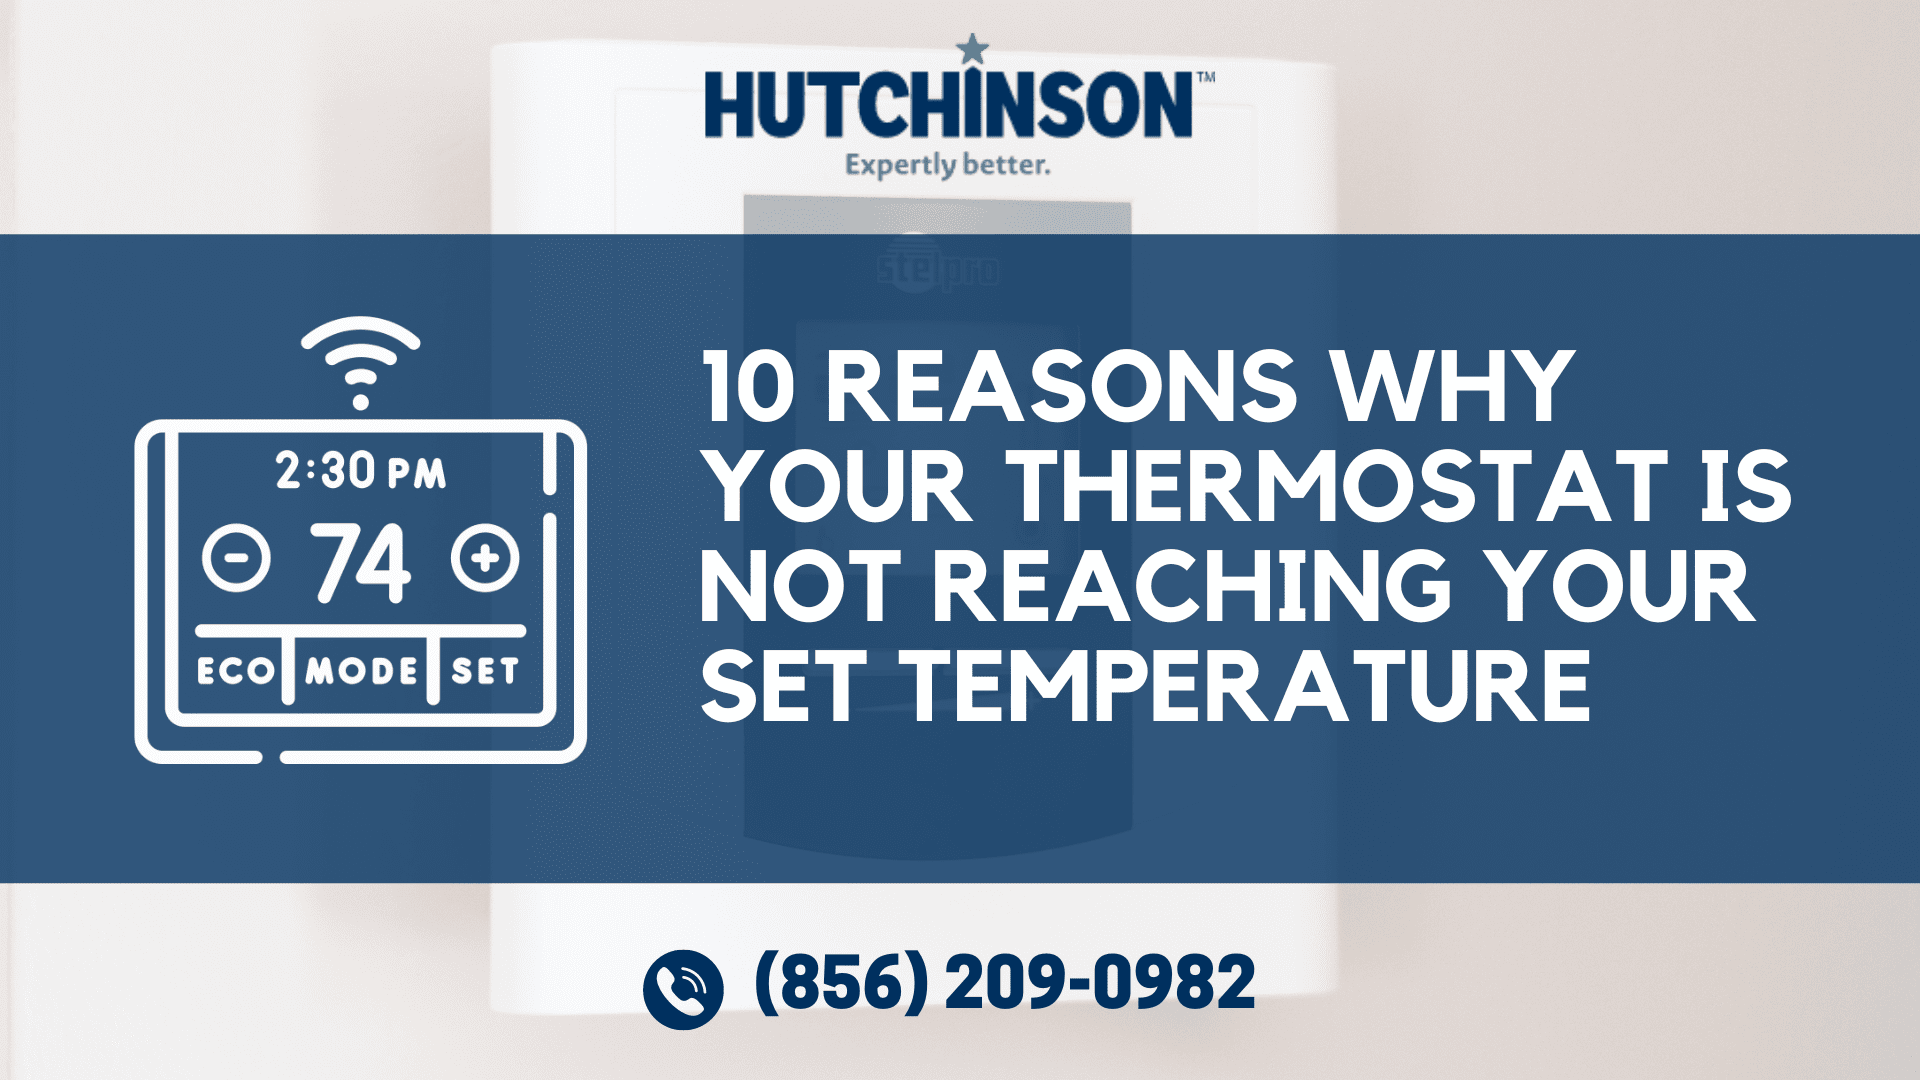 http://www.hutchbiz.com/wp-content/uploads/2022/05/10-Reasons-Why-Your-Thermostat-Is-Not-Reaching-Your-Set-Temperature.png